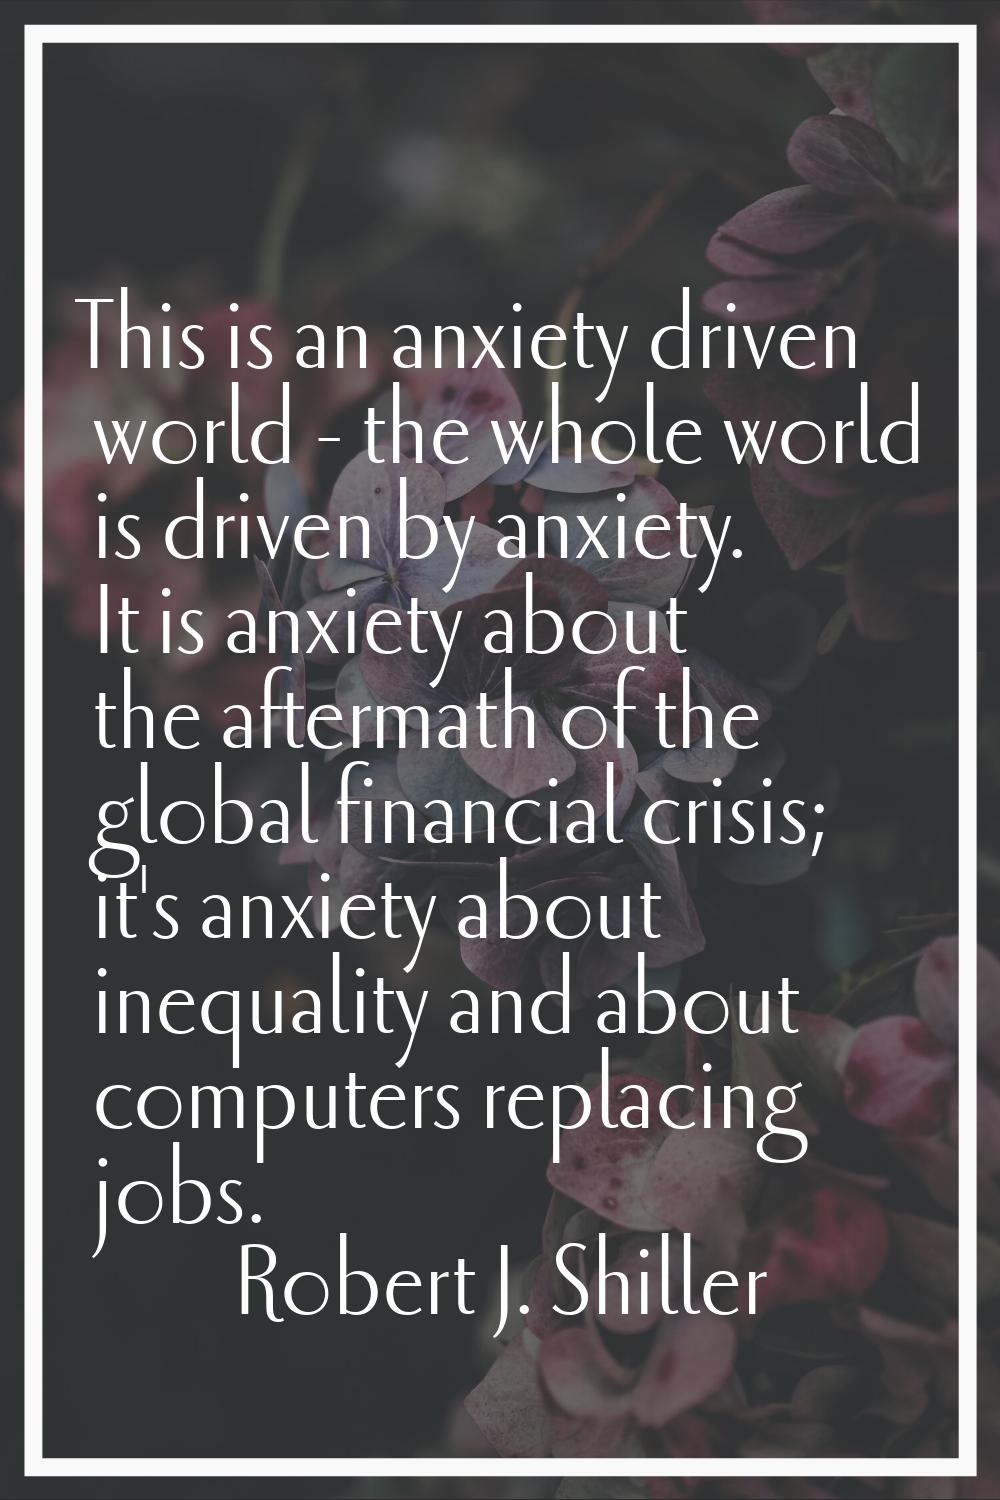 This is an anxiety driven world - the whole world is driven by anxiety. It is anxiety about the aft